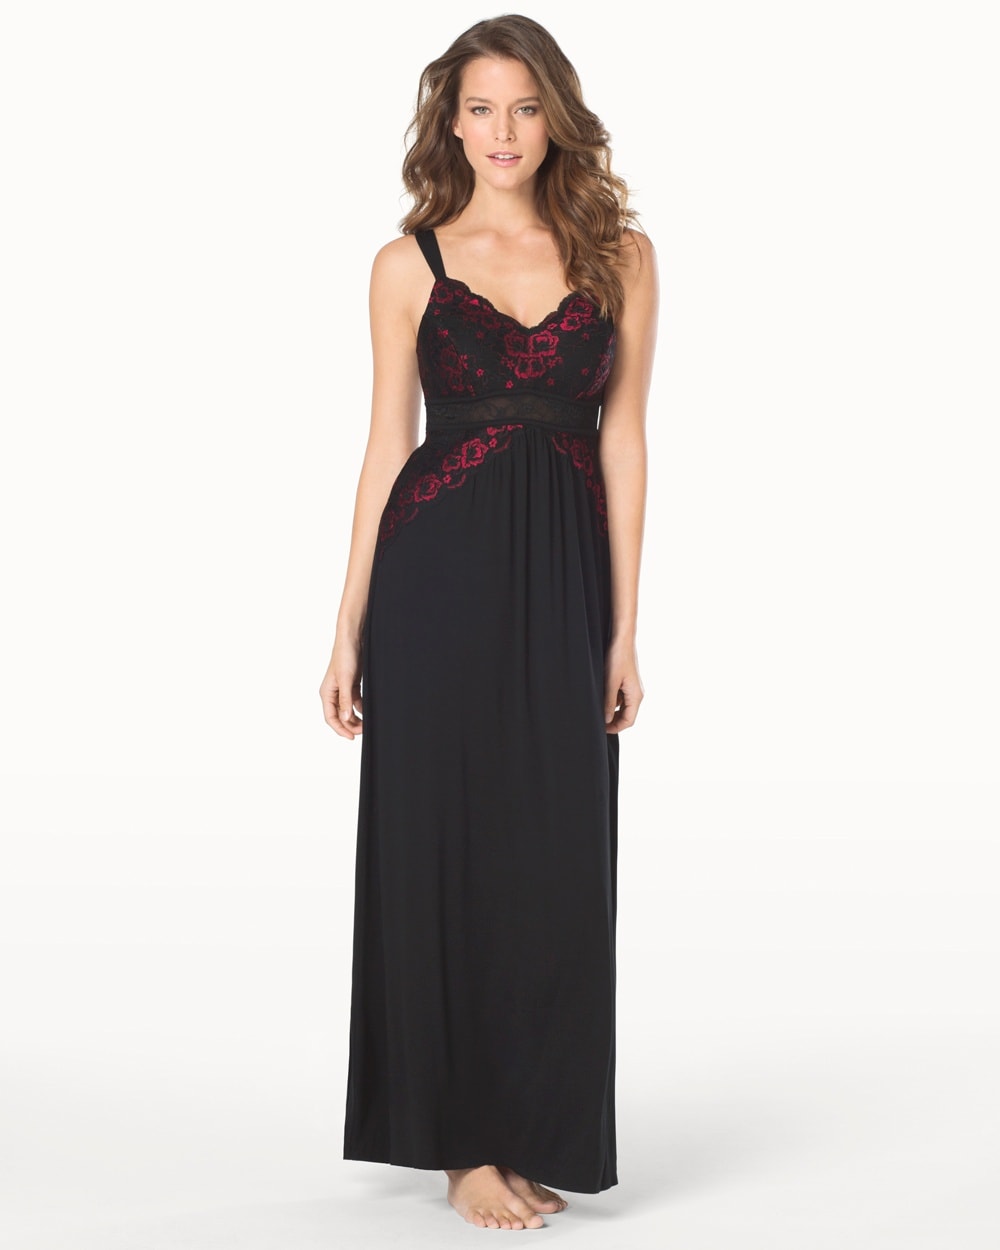 Limited Edition Floral Noir Nightgown Black With Ruby Lace